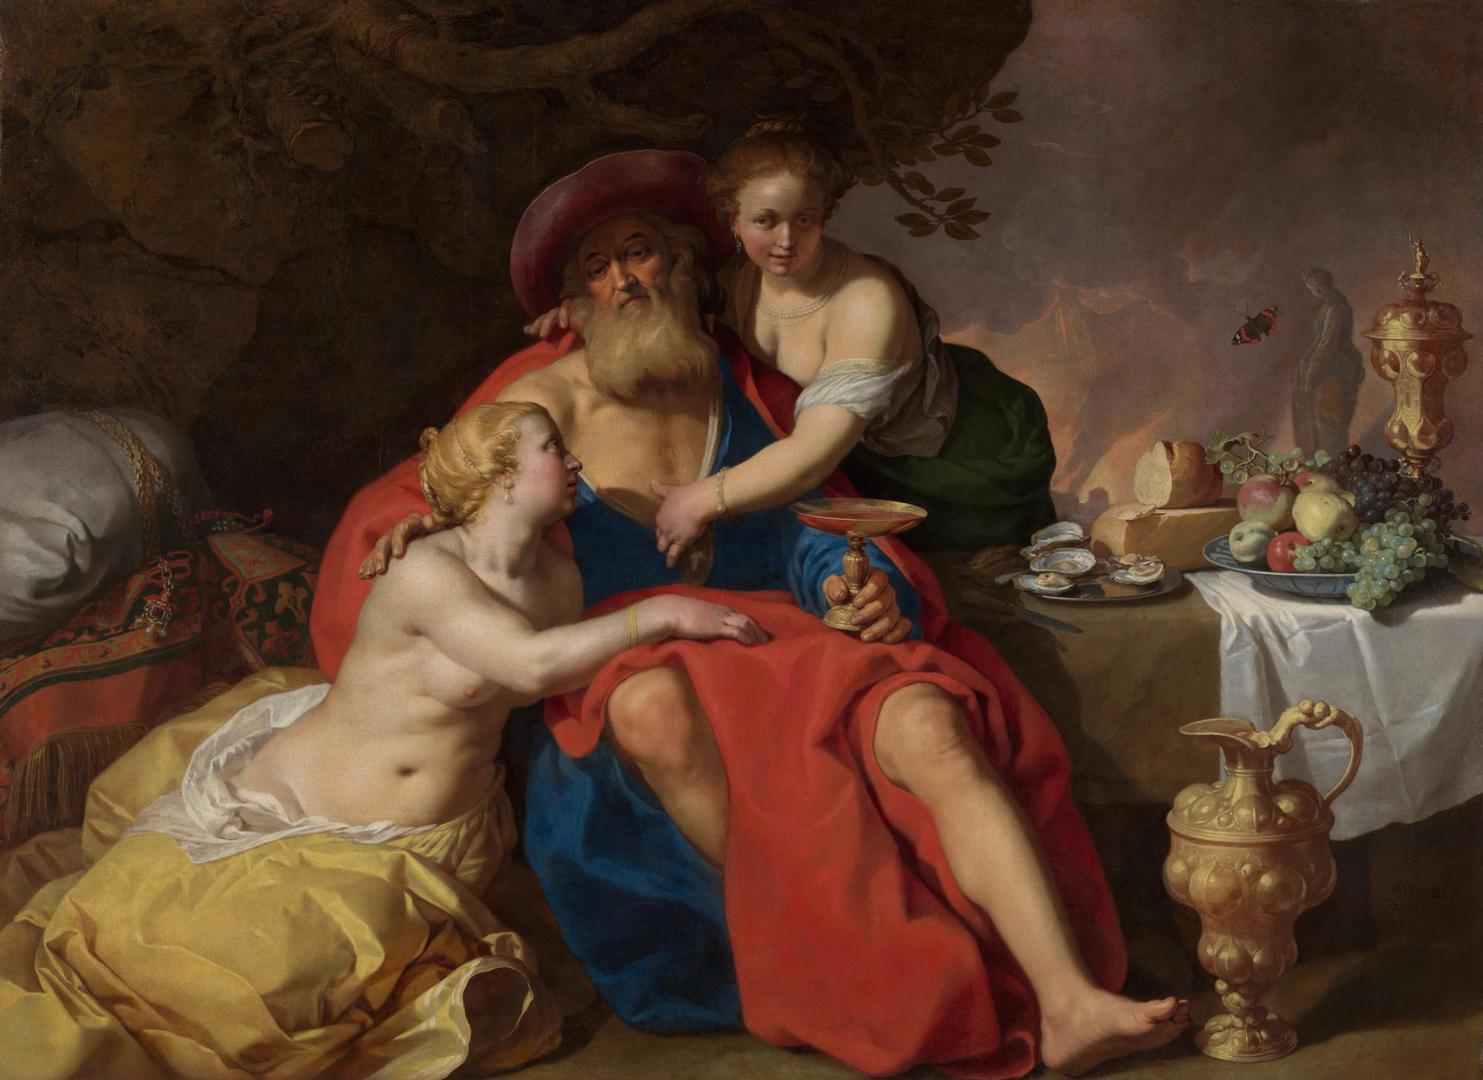 Lot and his Daughters by Abraham Bloemaert